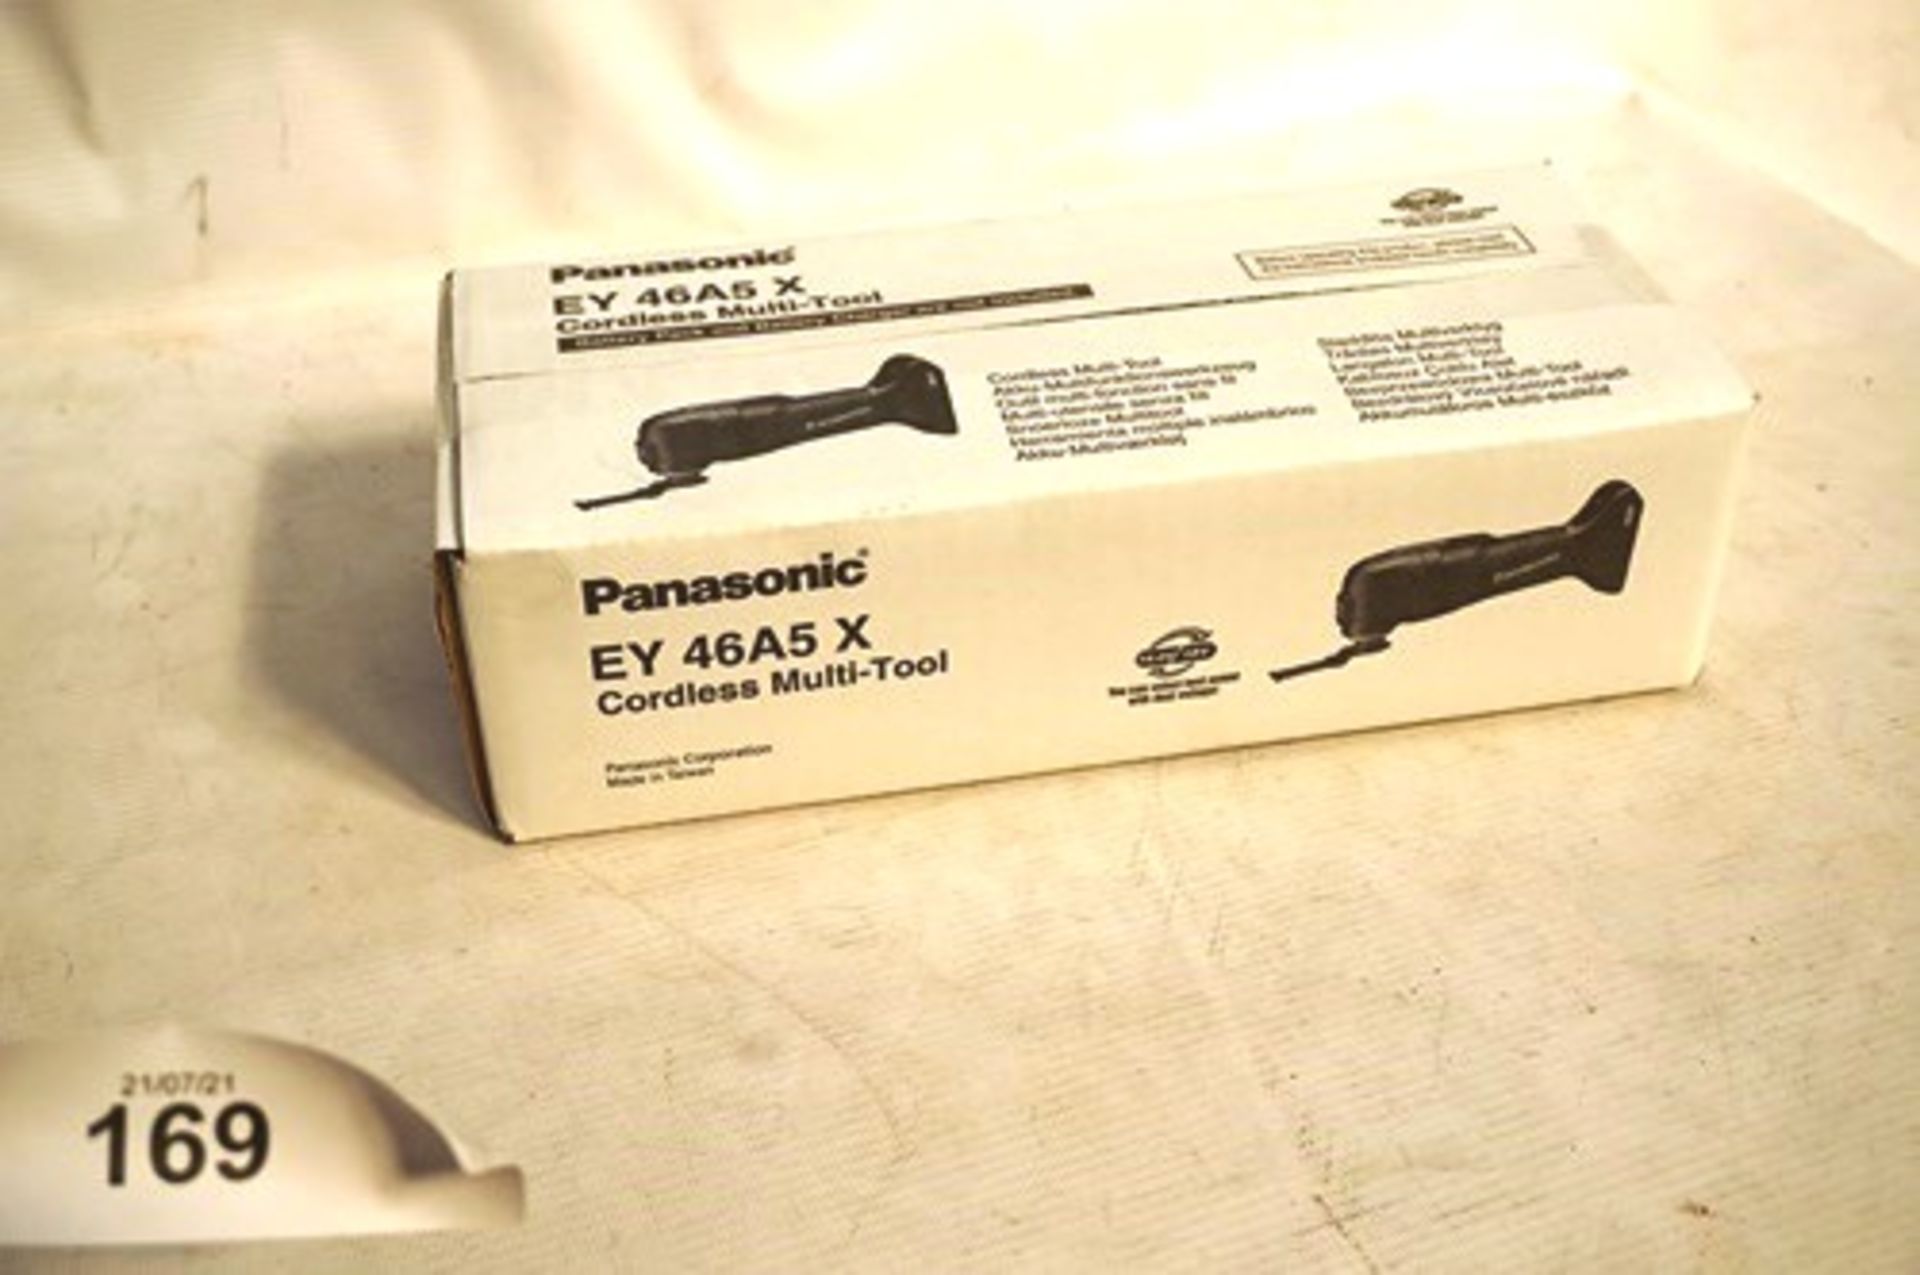 1 x Panasonic cordless multi tool, model EY46A5X, dual voltage - body only Sealed new in box (TC6)